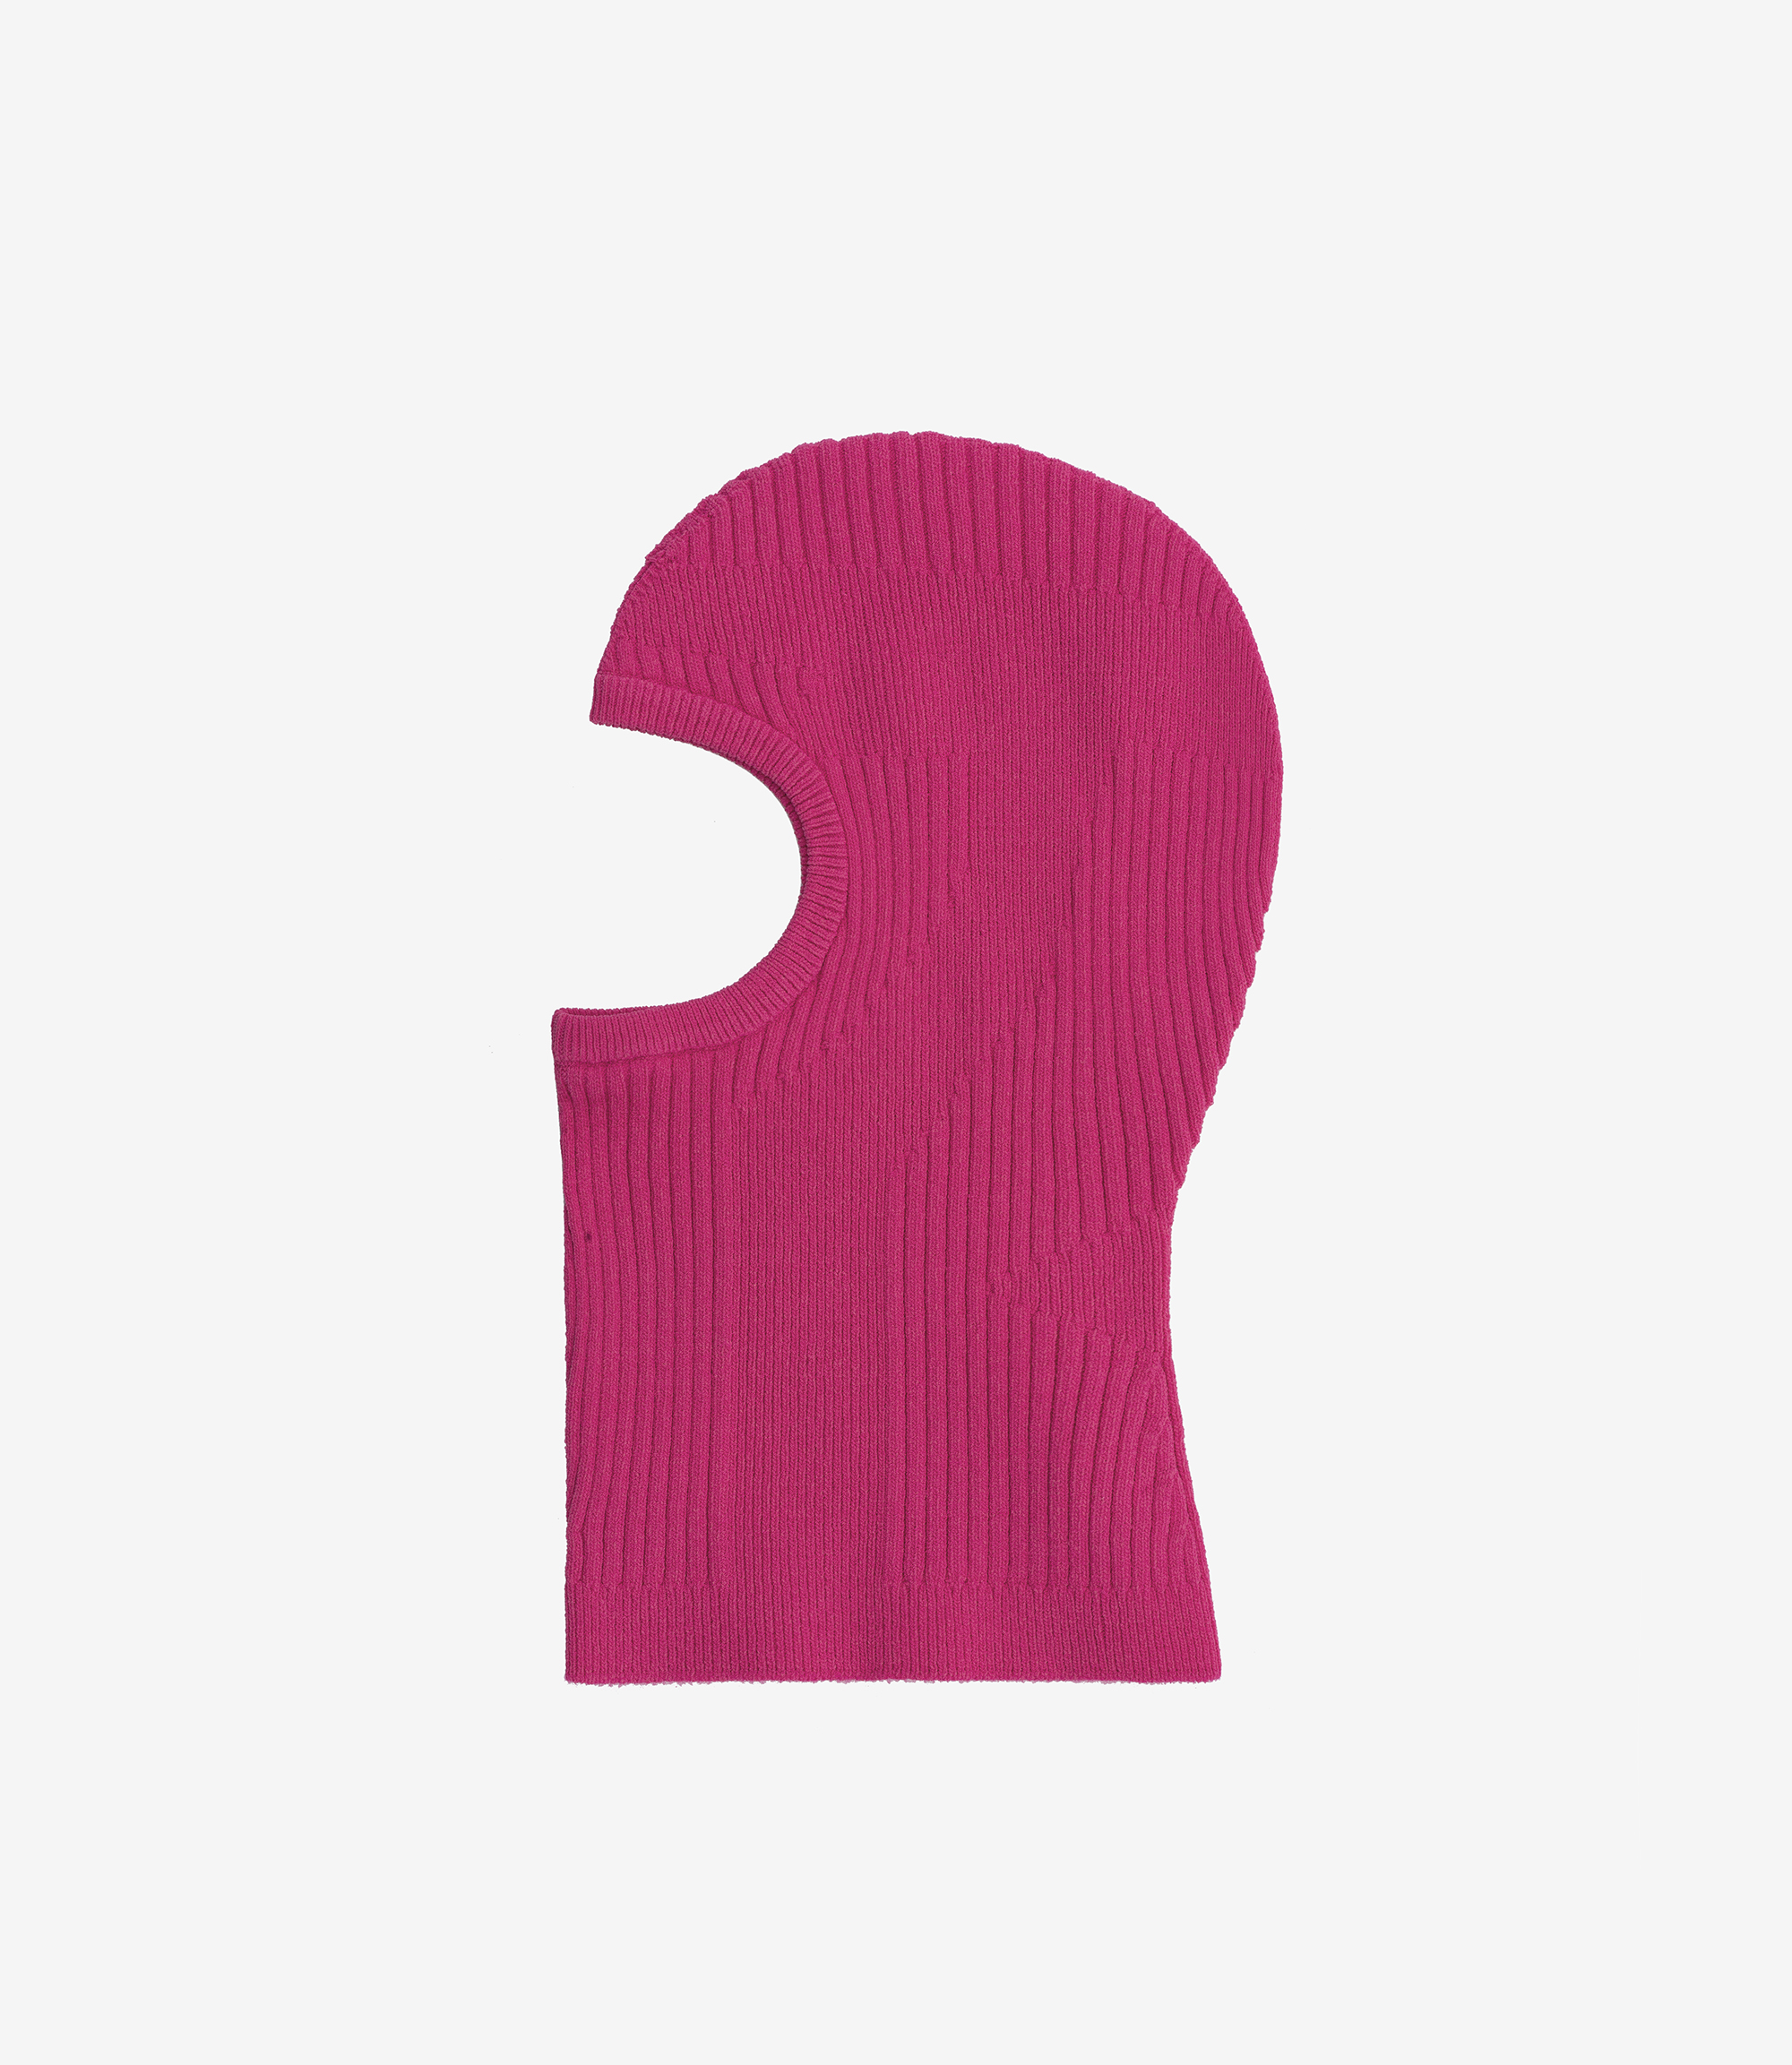 Shop MISBHV Knitted Balaclava Pink at itk online store